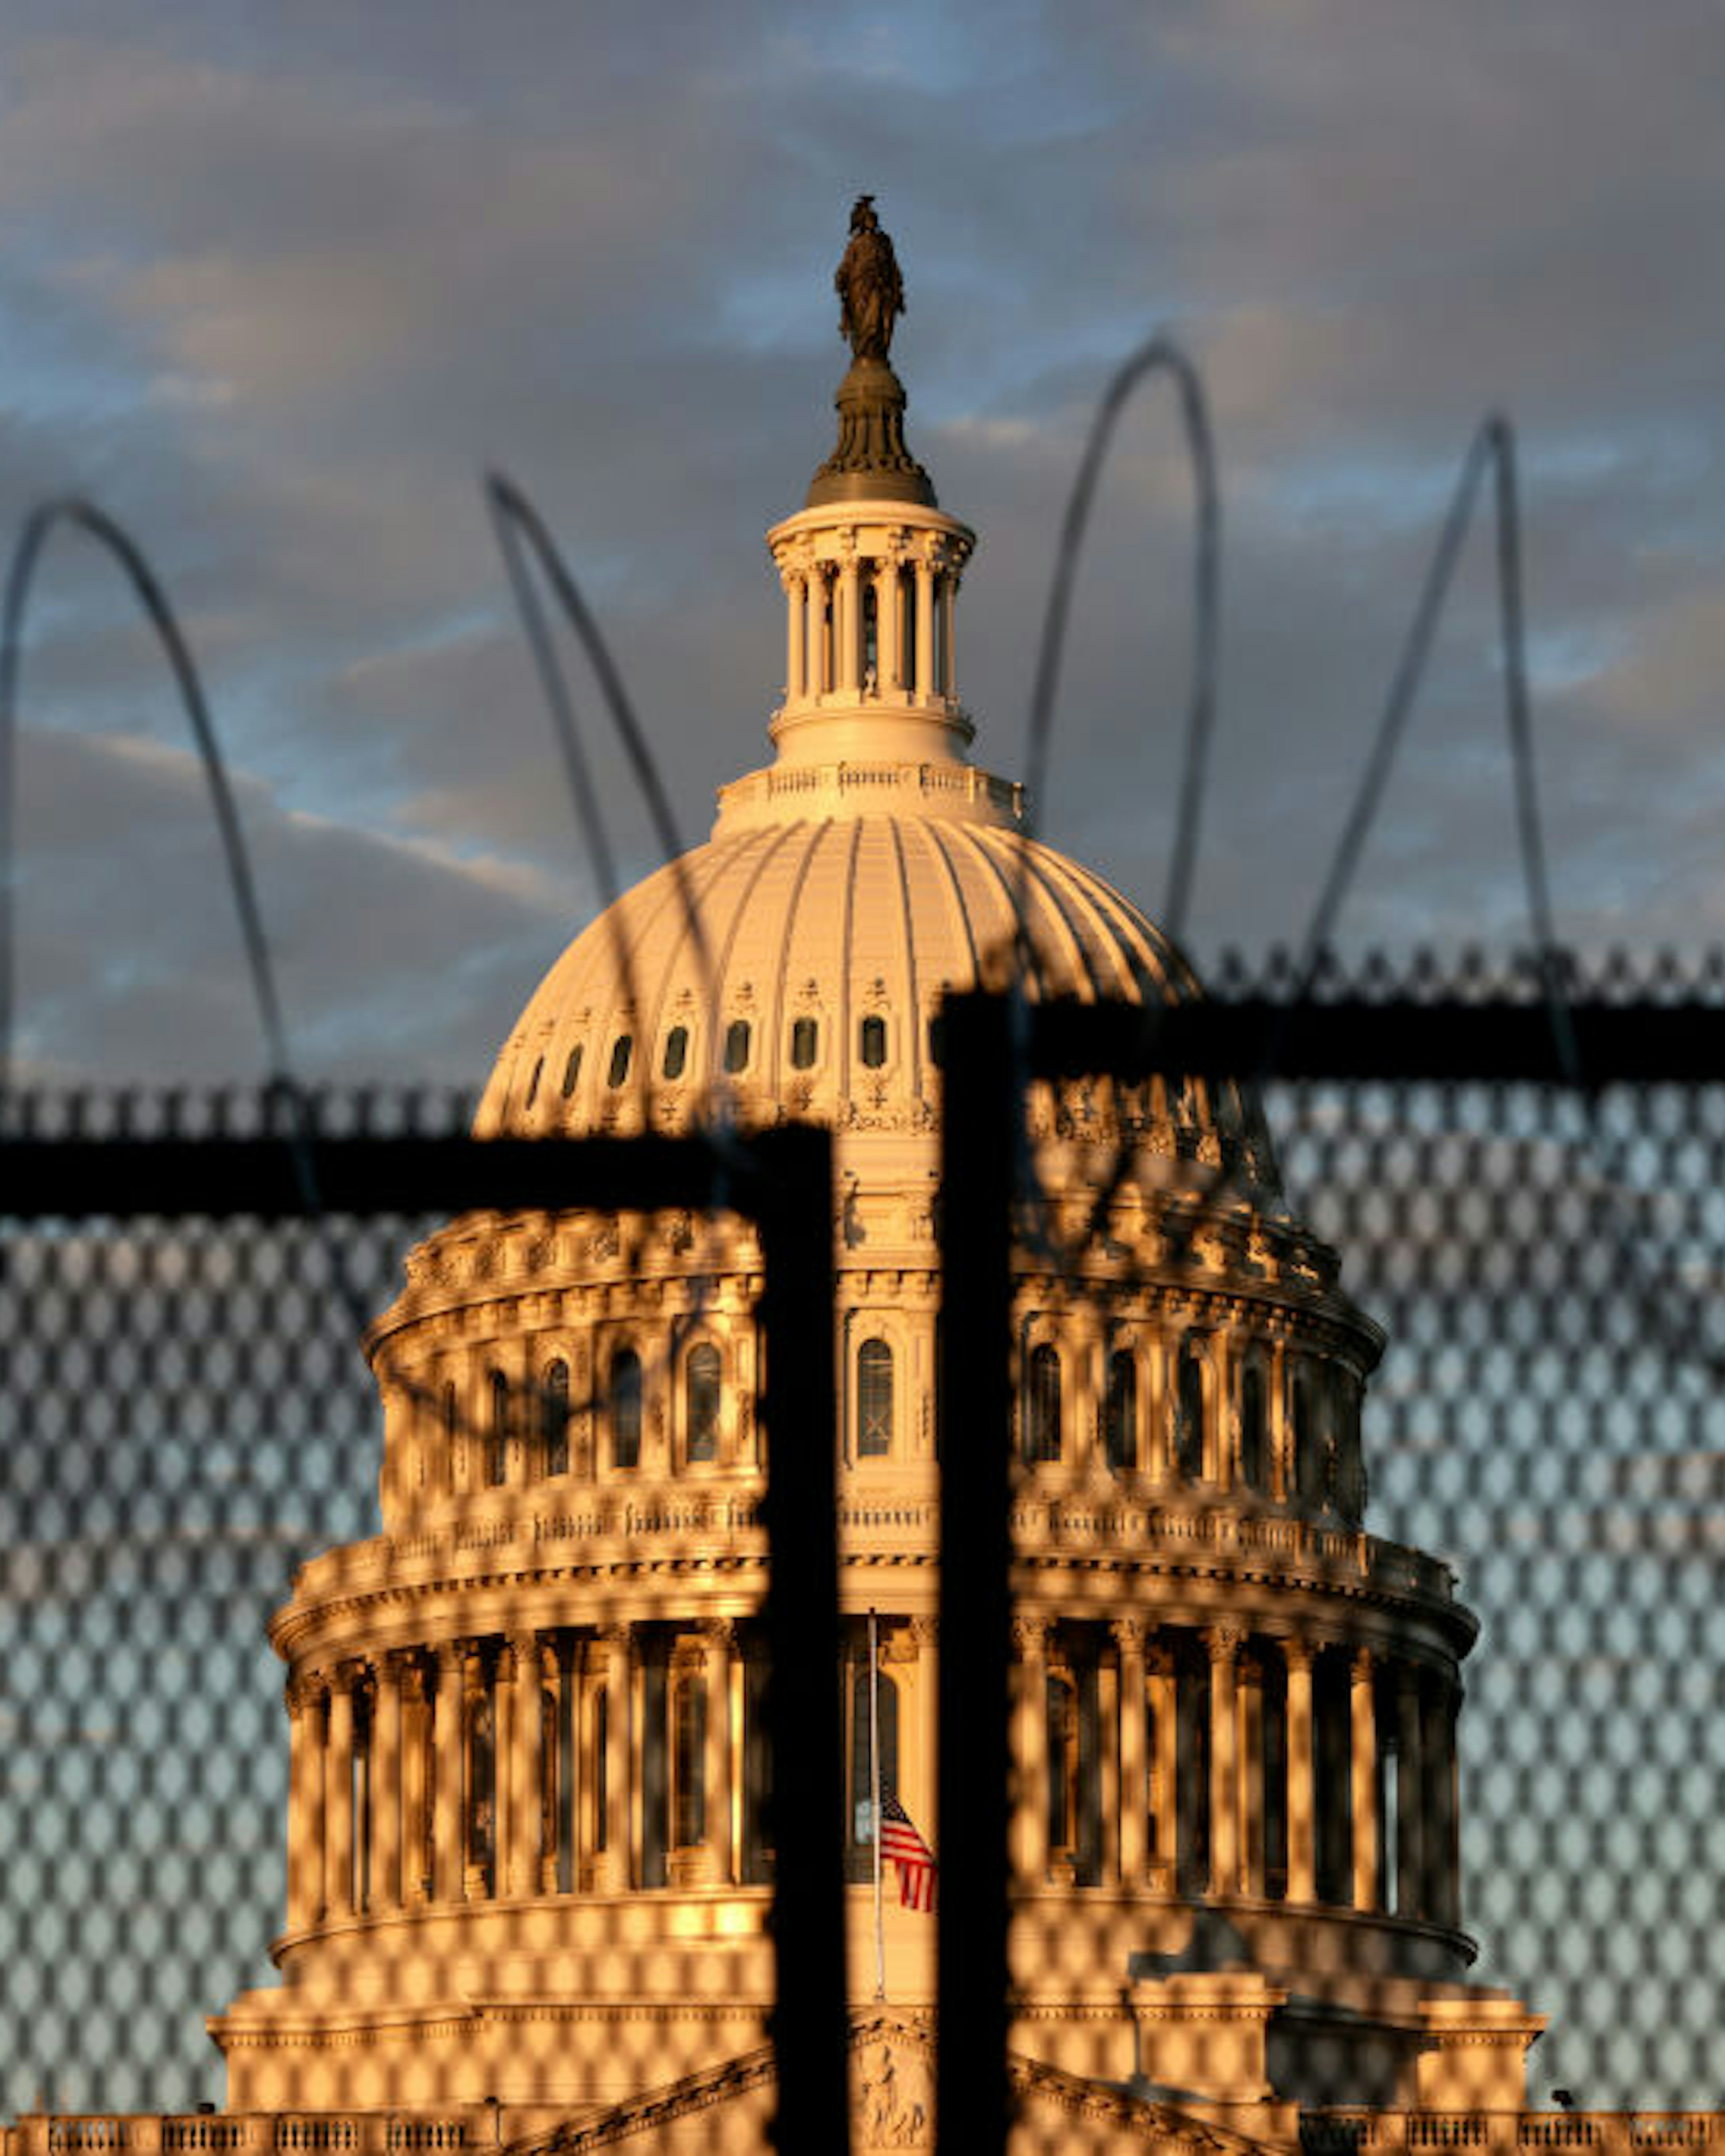 WASHINGTON, DC - JANUARY 16: The U.S. Capitol is seen behind a fence with razor wire during sunrise on January 16, 2021 in Washington, DC. After last week's riots at the U.S. Capitol Building, the FBI has warned of additional threats in the nation's capital and in all 50 states. According to reports, as many as 25,000 National Guard soldiers will be guarding the city as preparations are made for the inauguration of Joe Biden as the 46th U.S. President. (Photo by Samuel Corum/Getty Images)